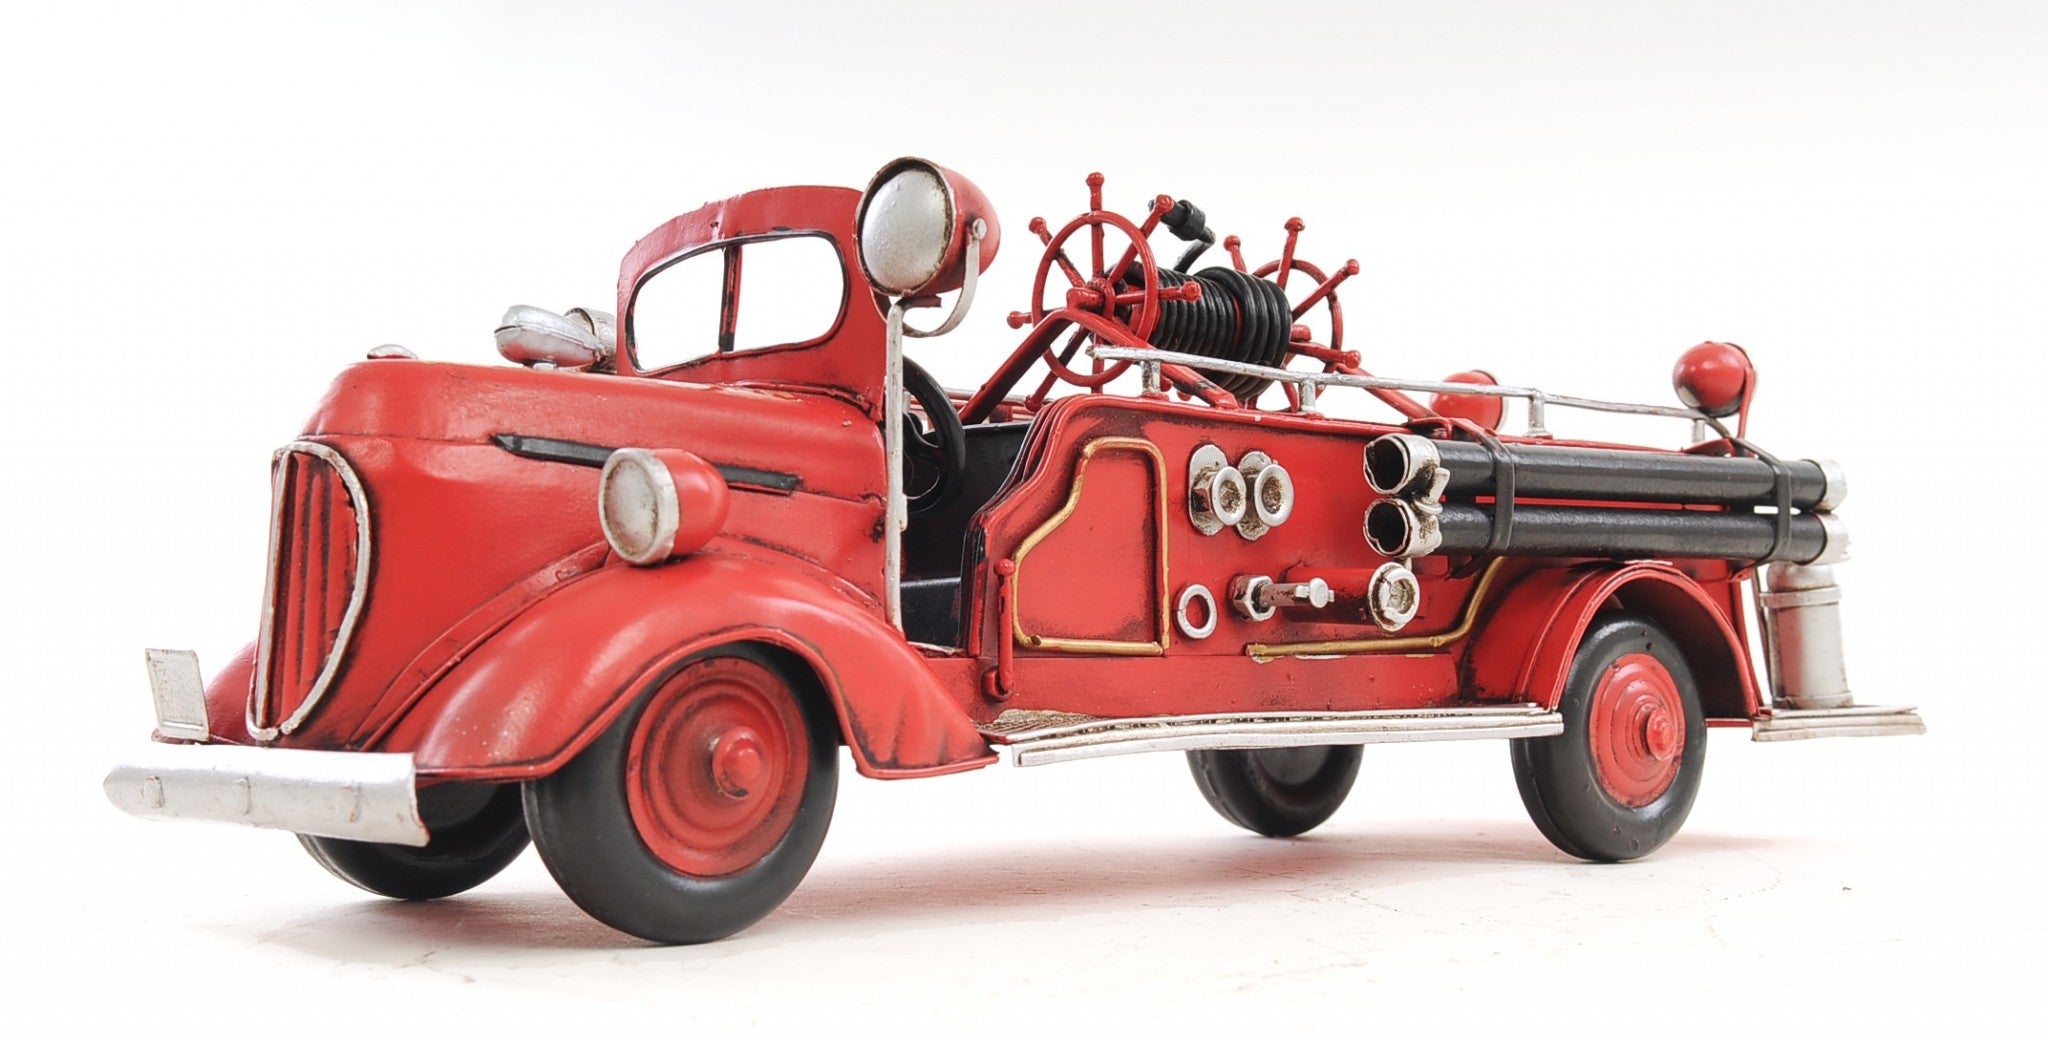 c1938-Ford-Red-Fire-Engine-Sculpture-Sculptures